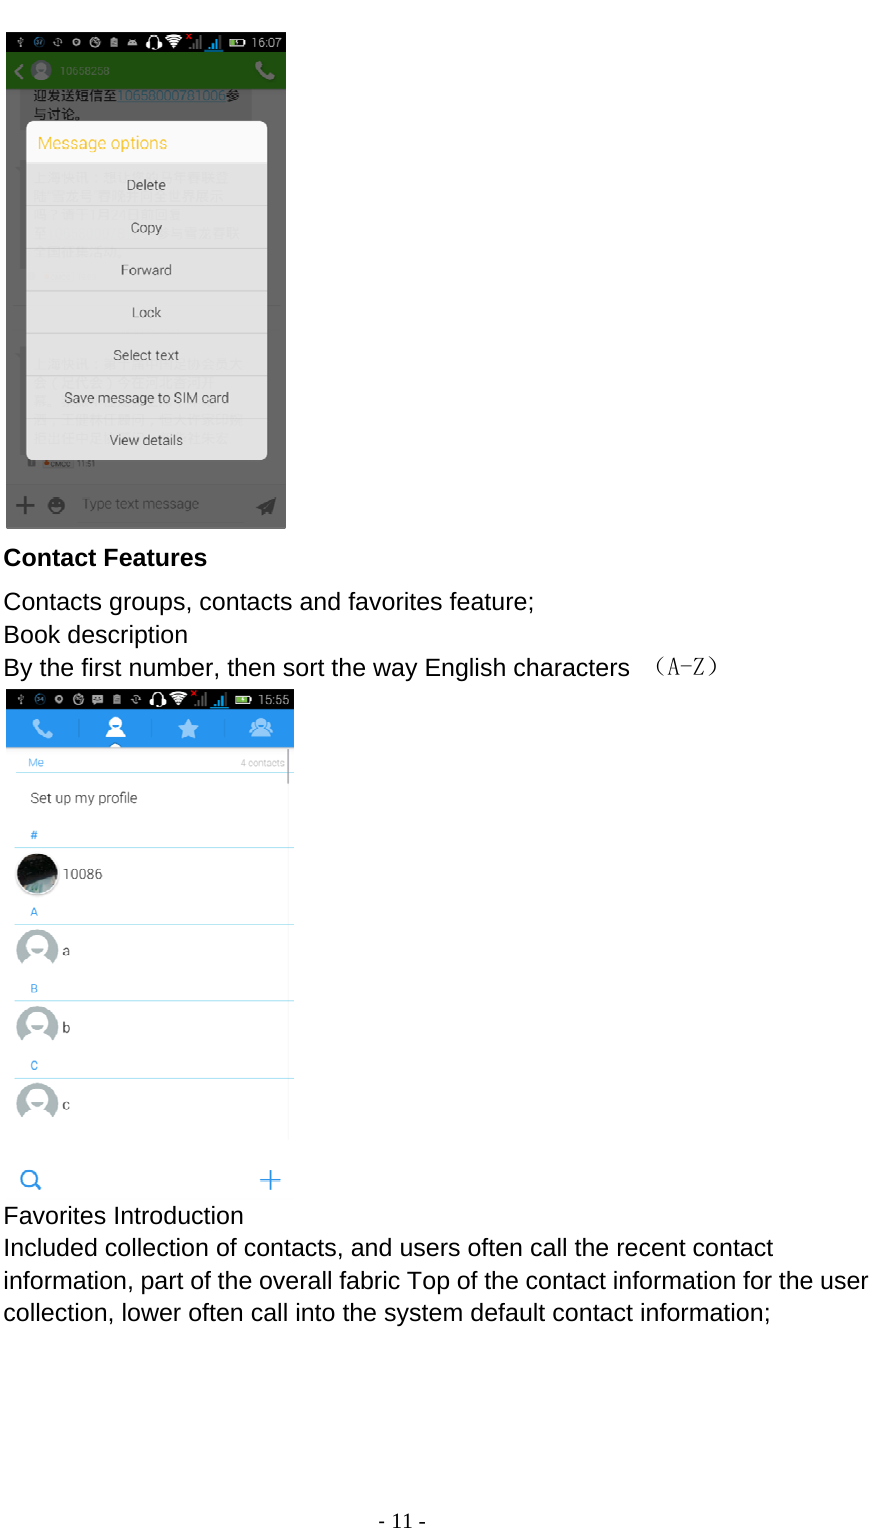                                          ‐ 11 -  Contact Features Contacts groups, contacts and favorites feature; Book description By the first number, then sort the way English characters  （A-Z）  Favorites Introduction Included collection of contacts, and users often call the recent contact information, part of the overall fabric Top of the contact information for the user collection, lower often call into the system default contact information; 